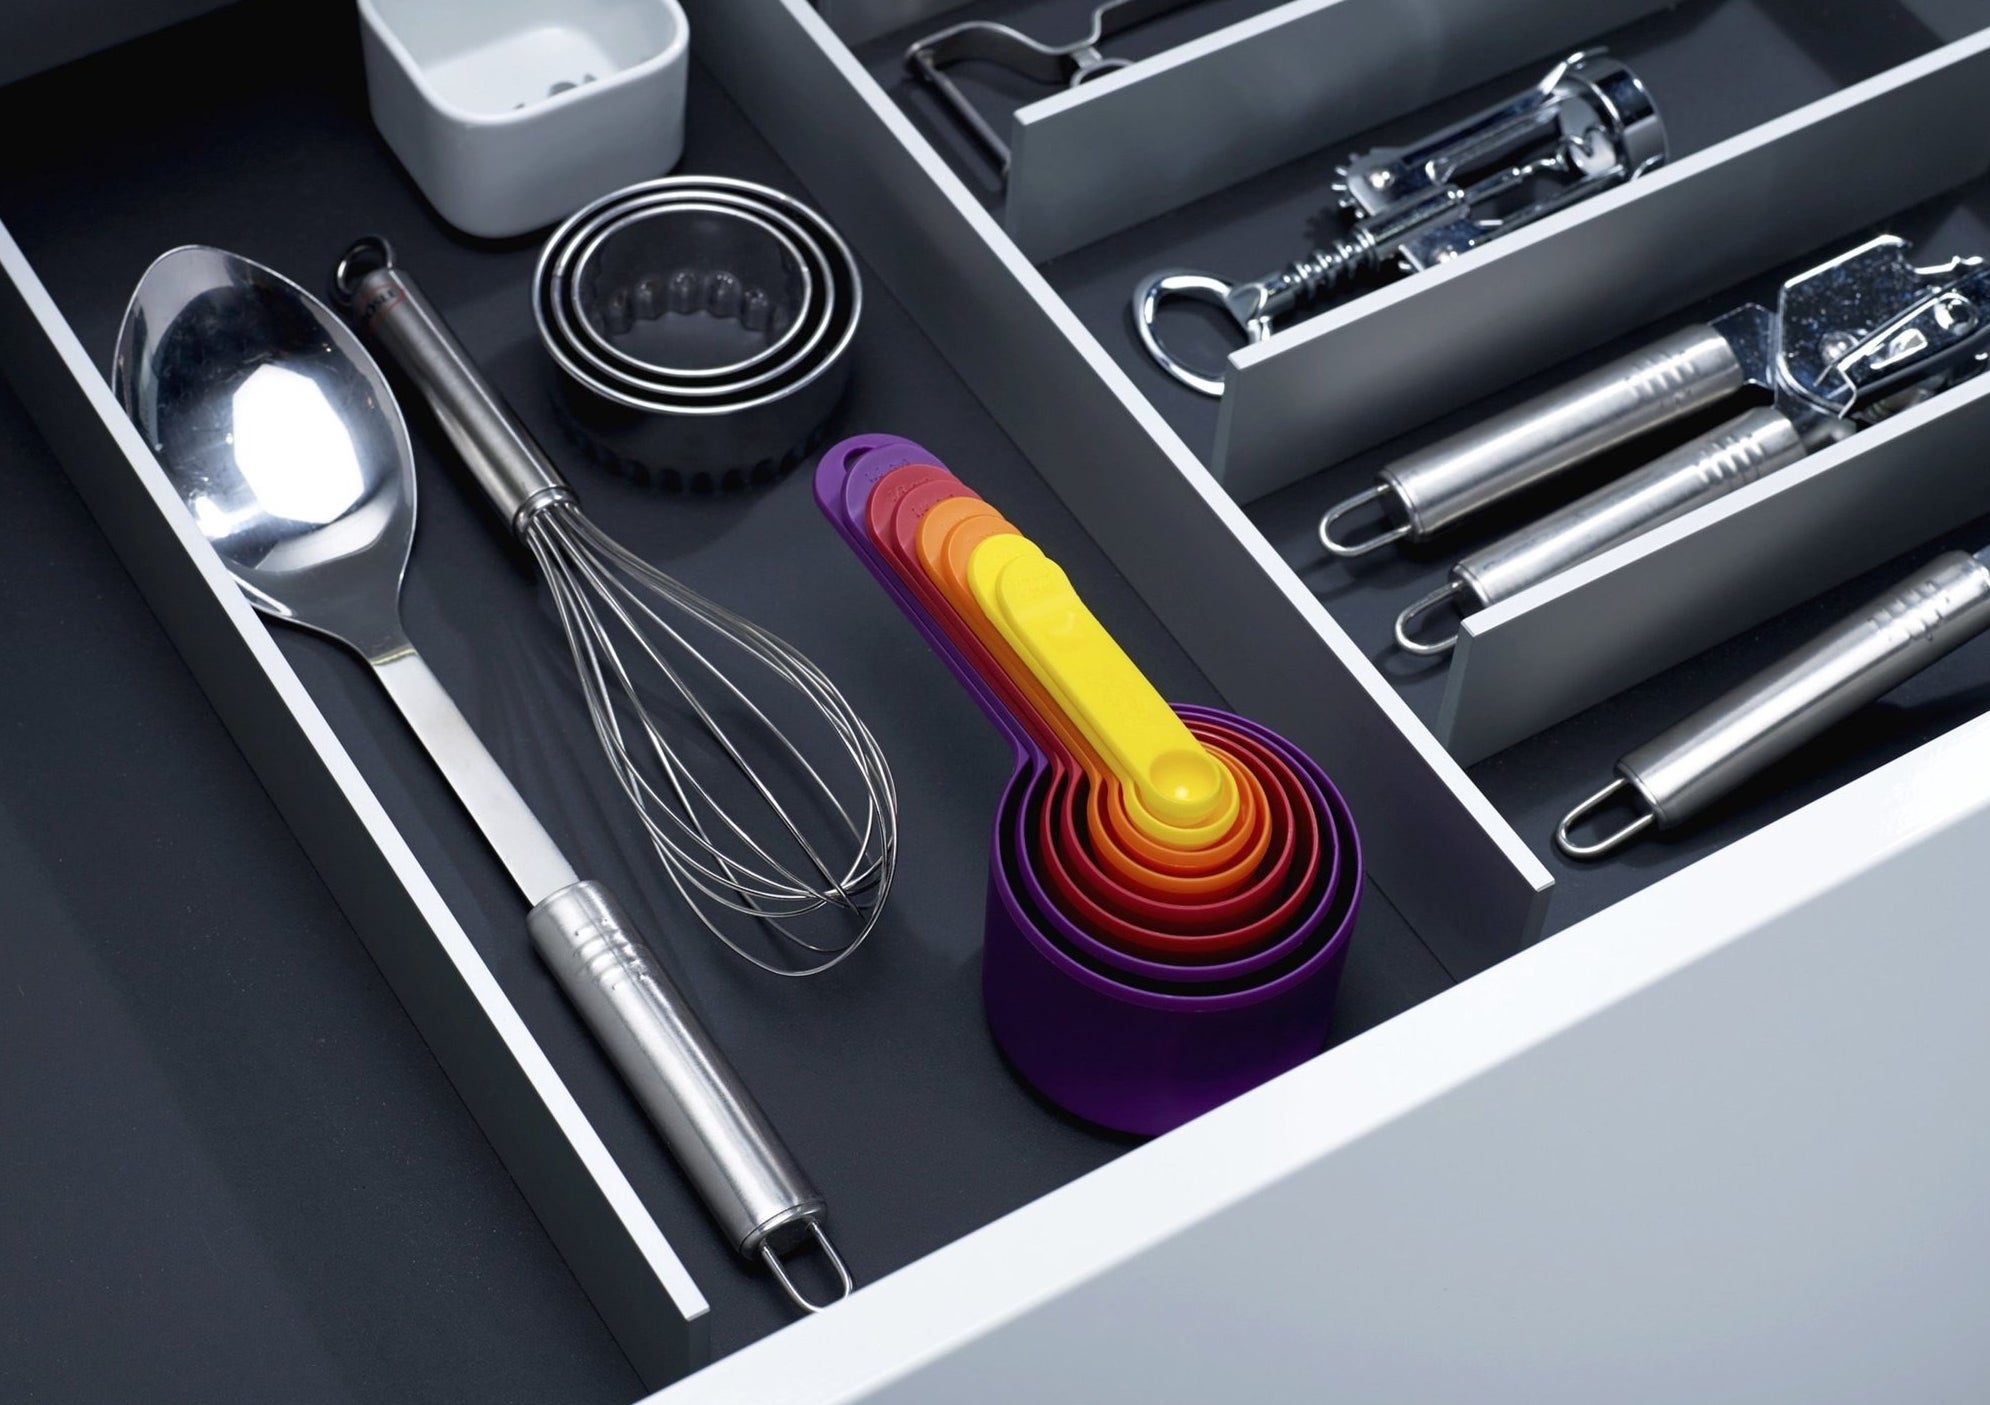 The nesting, multi-colored measuring cups in a drawer with other utensils